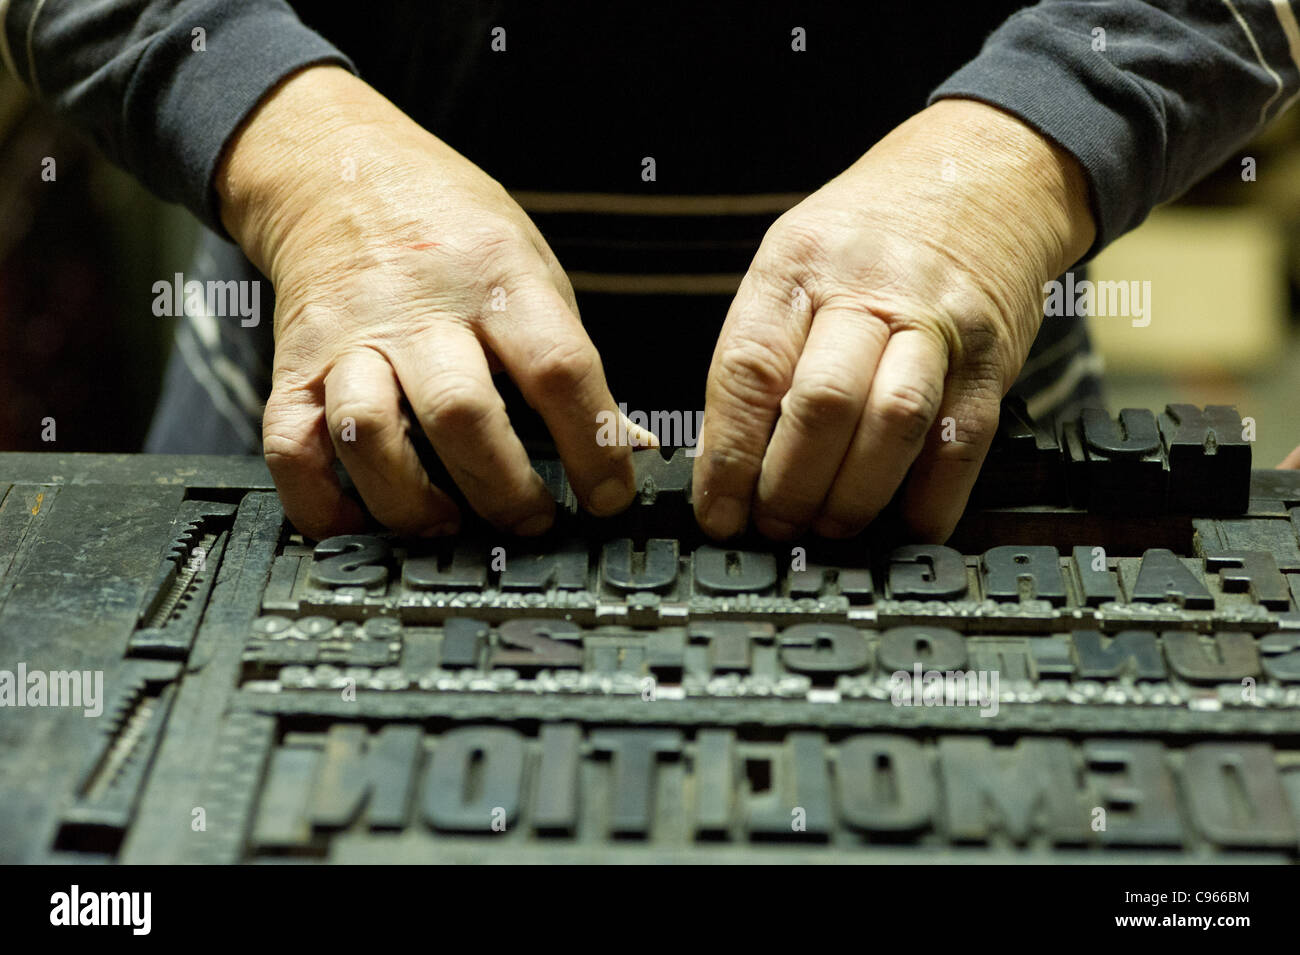 Hands working with print block letters  Stock Photo